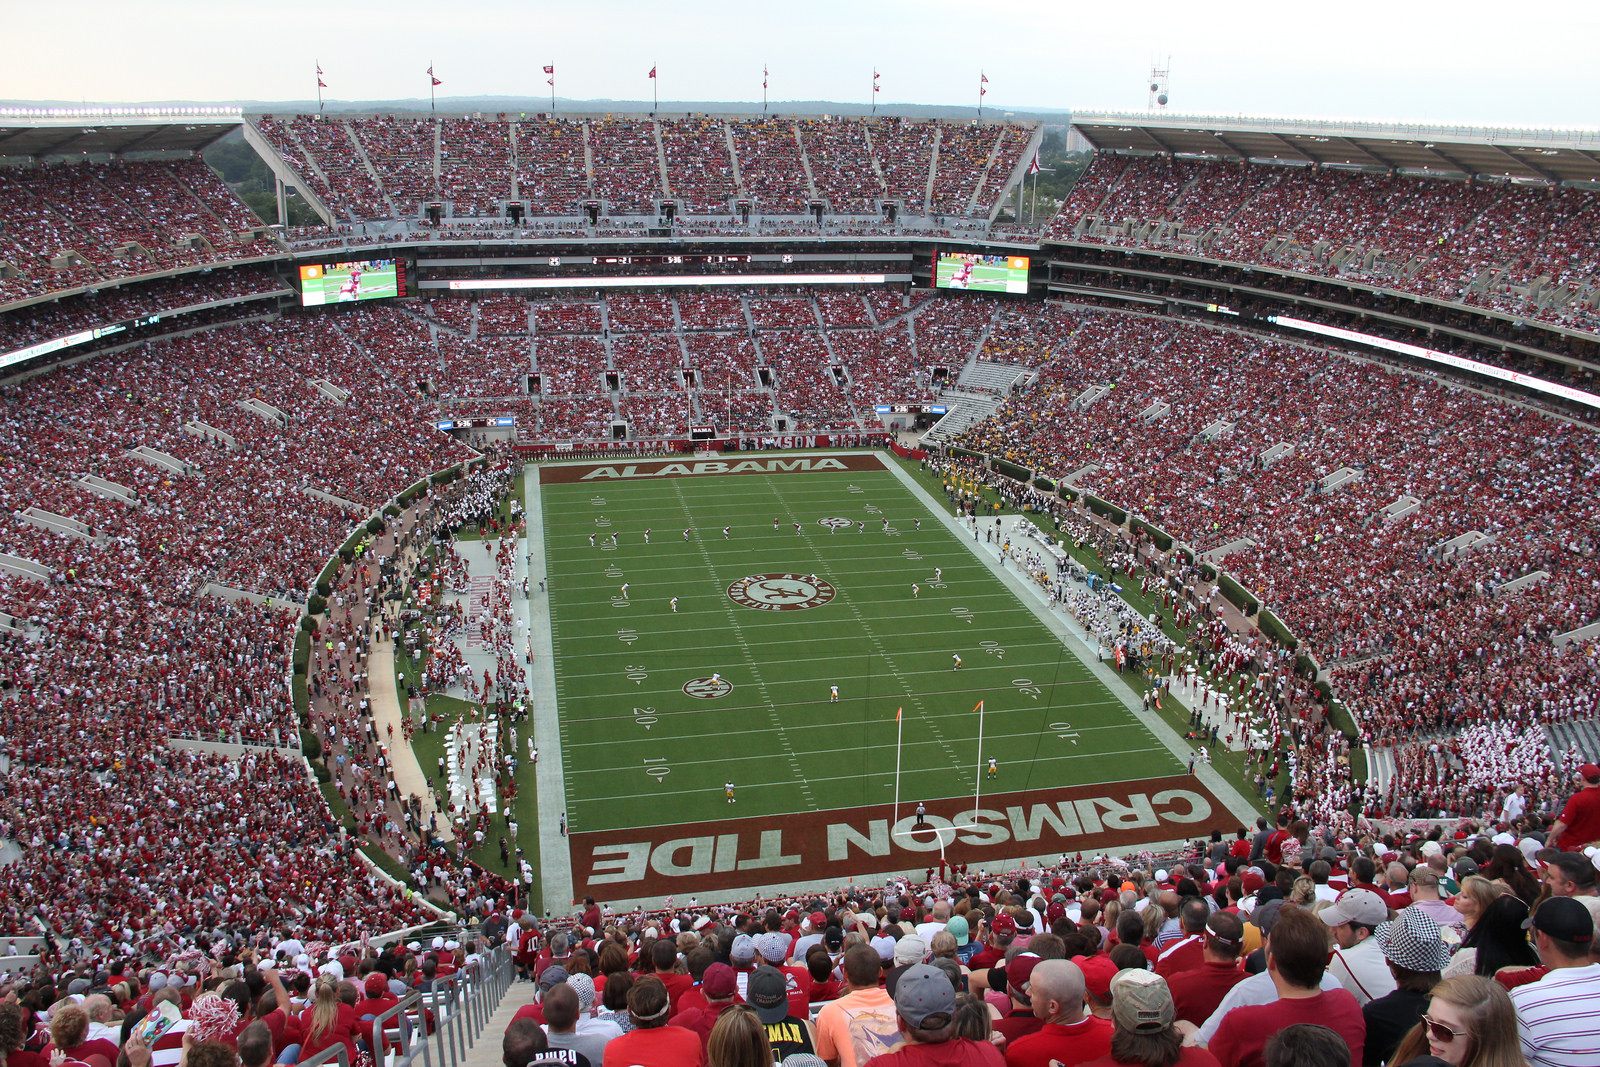 The list of Tuscaloosa day trips is quite extensive, and believe it or not, there are several items on the list that are not related to Alabama Football.